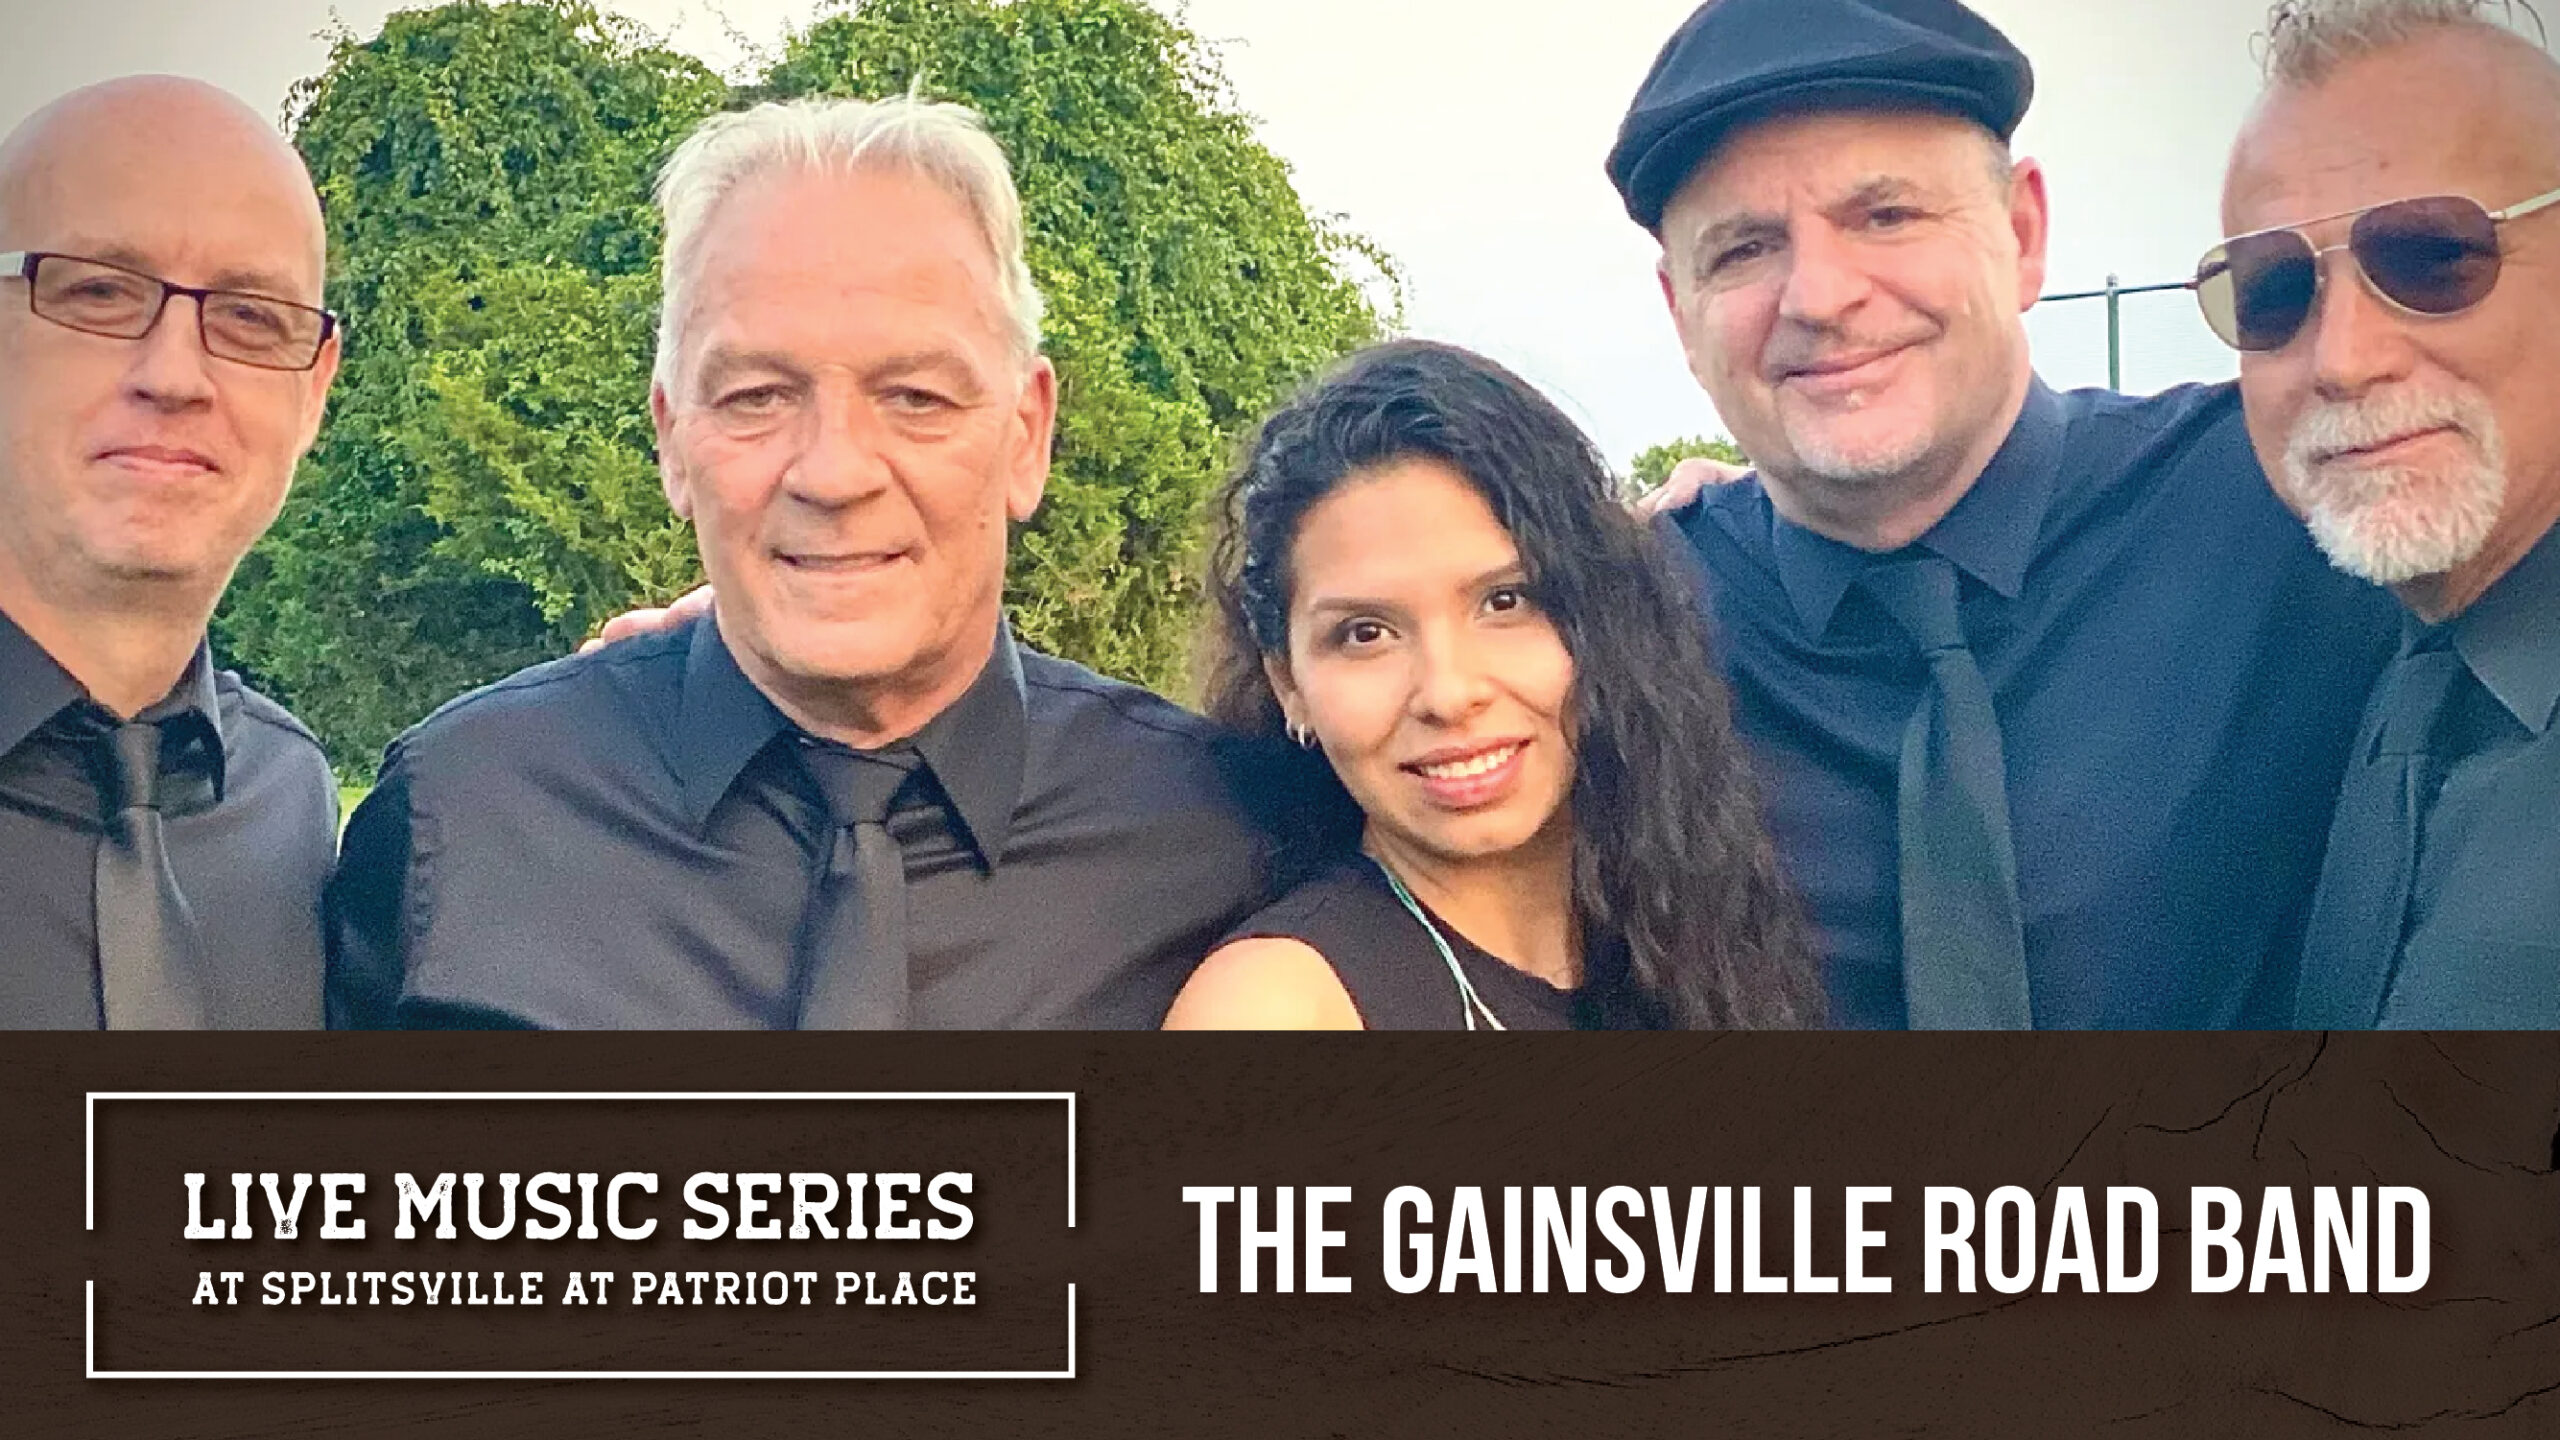 The Gainsville Road Band